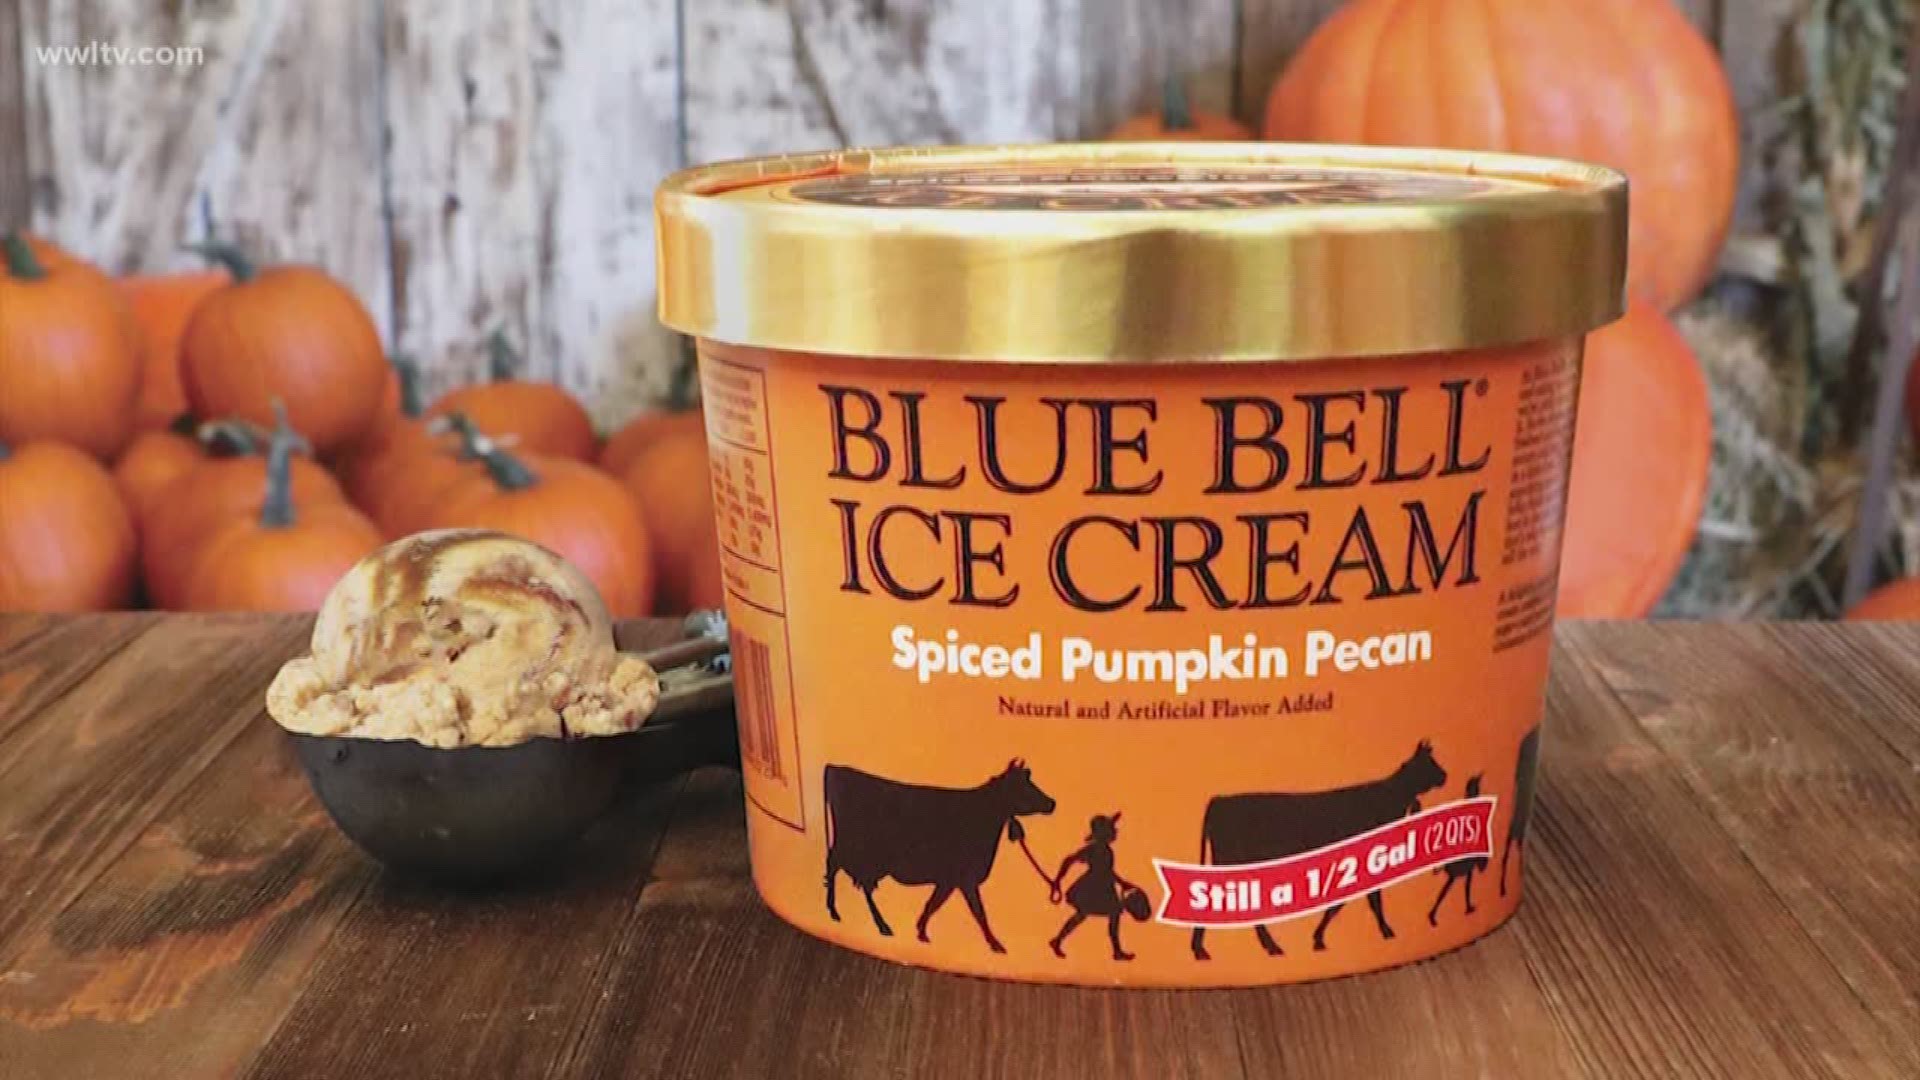 Blue Bell says the flavor combines sugar coated pecans with a cinnamon-honey-praline sauce.